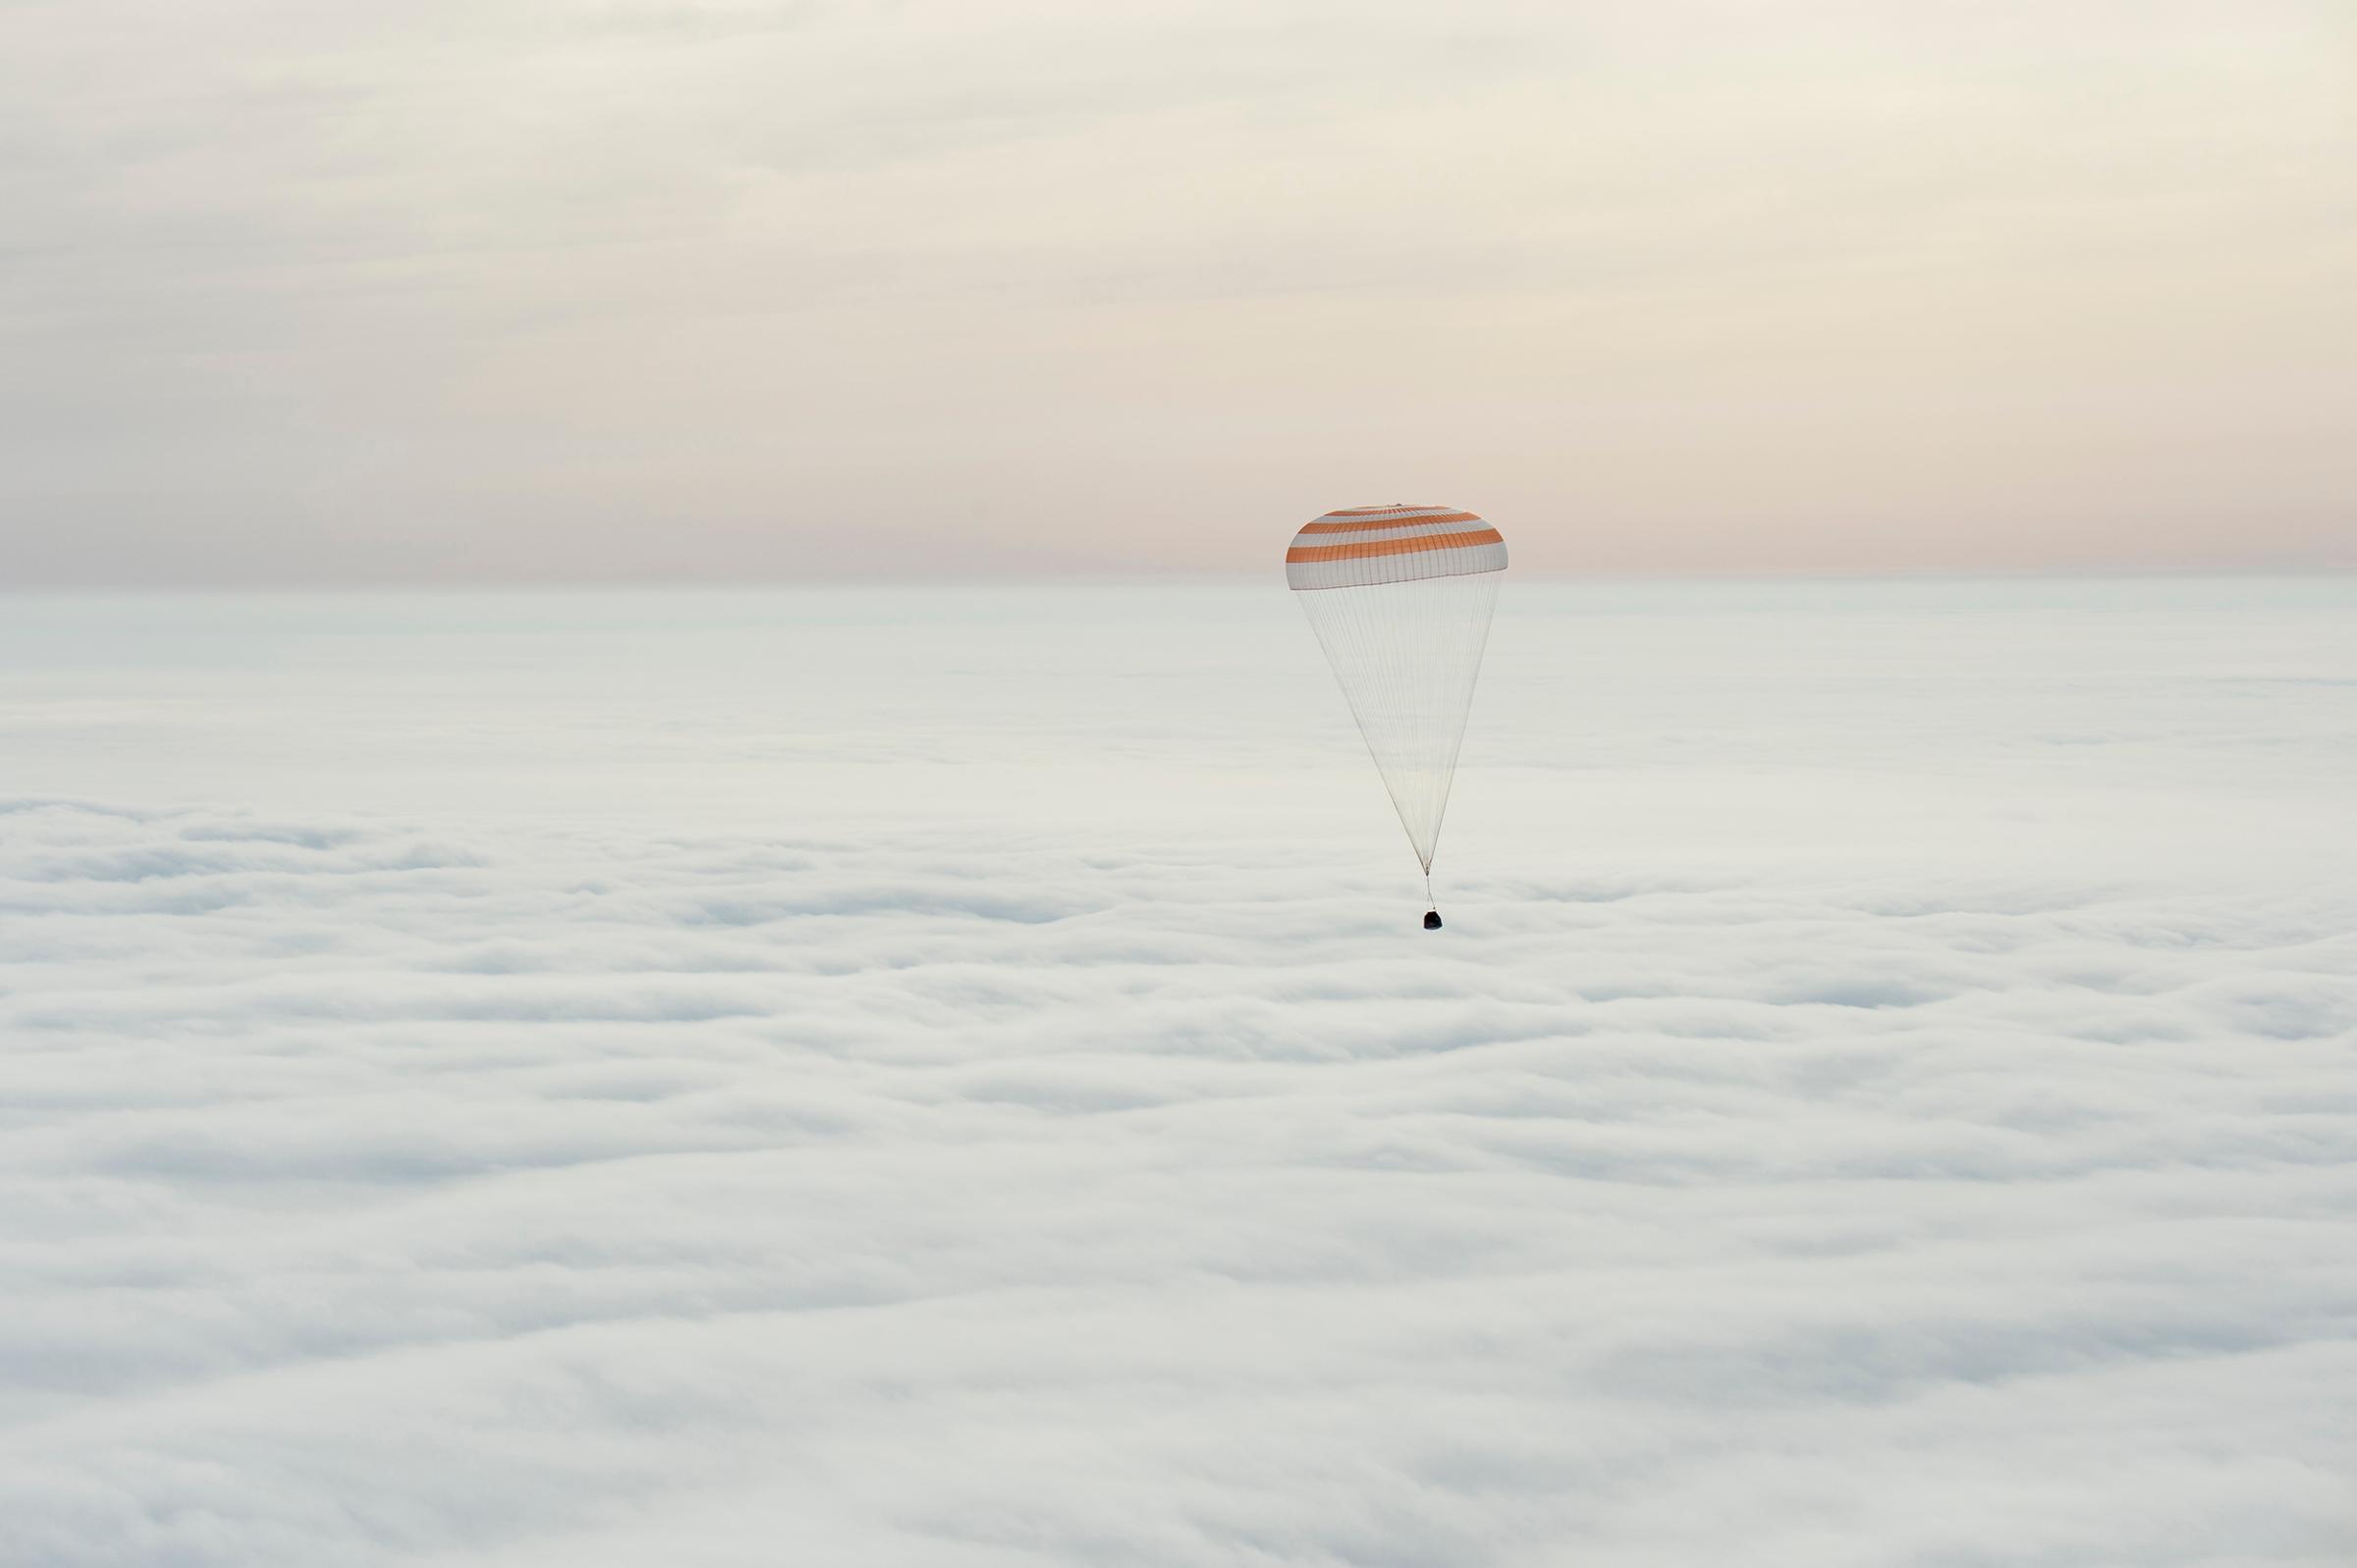 The Soyuz TMA-18M spacecraft is seen as it lands with Expedition 46 Commander Scott Kelly of NASA and Russian cosmonauts Mikhail Kornienko and Sergey Volkov of Roscosmos near the town of Zhezkazgan, Kazakhstan on March 2, 2016